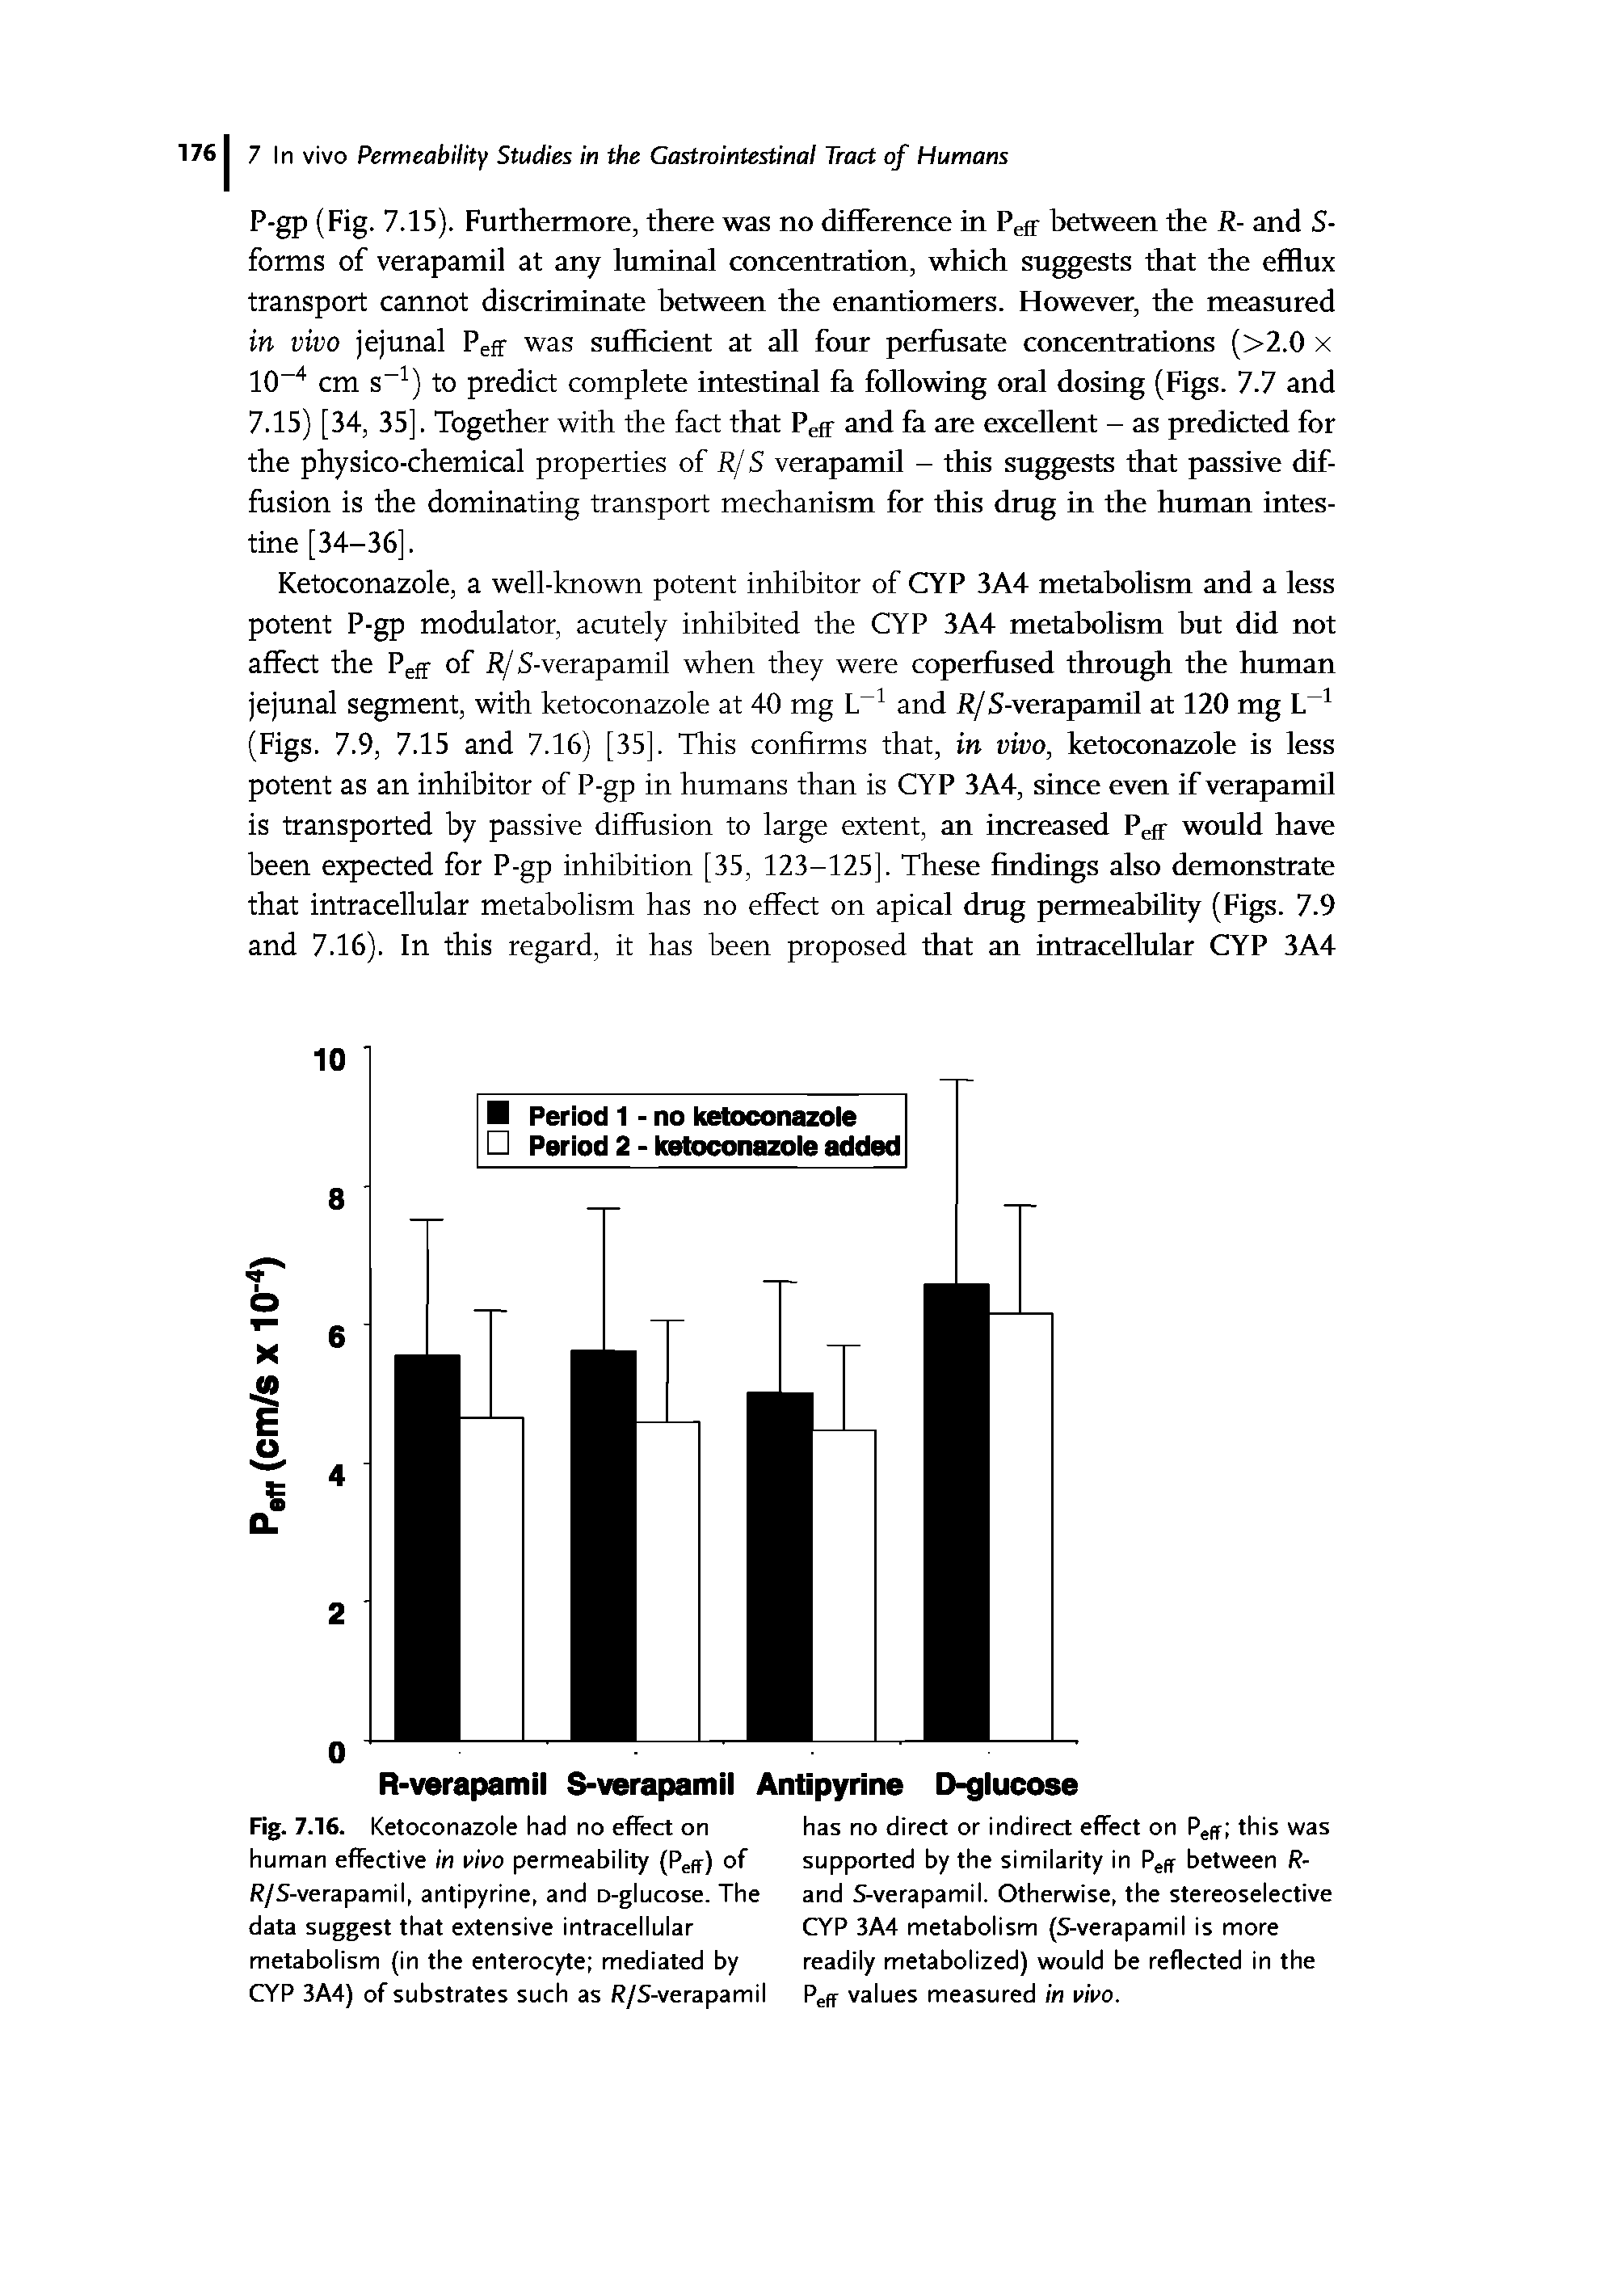 Fig. 7.16. Ketoconazole had no effect on human effective in vivo permeability (Pefr) of R/S-verapamil, antipyrine, and D-glucose. The data suggest that extensive intracellular metabolism (in the enterocyte mediated by CYP 3A4) of substrates such as R/S-verapamil...